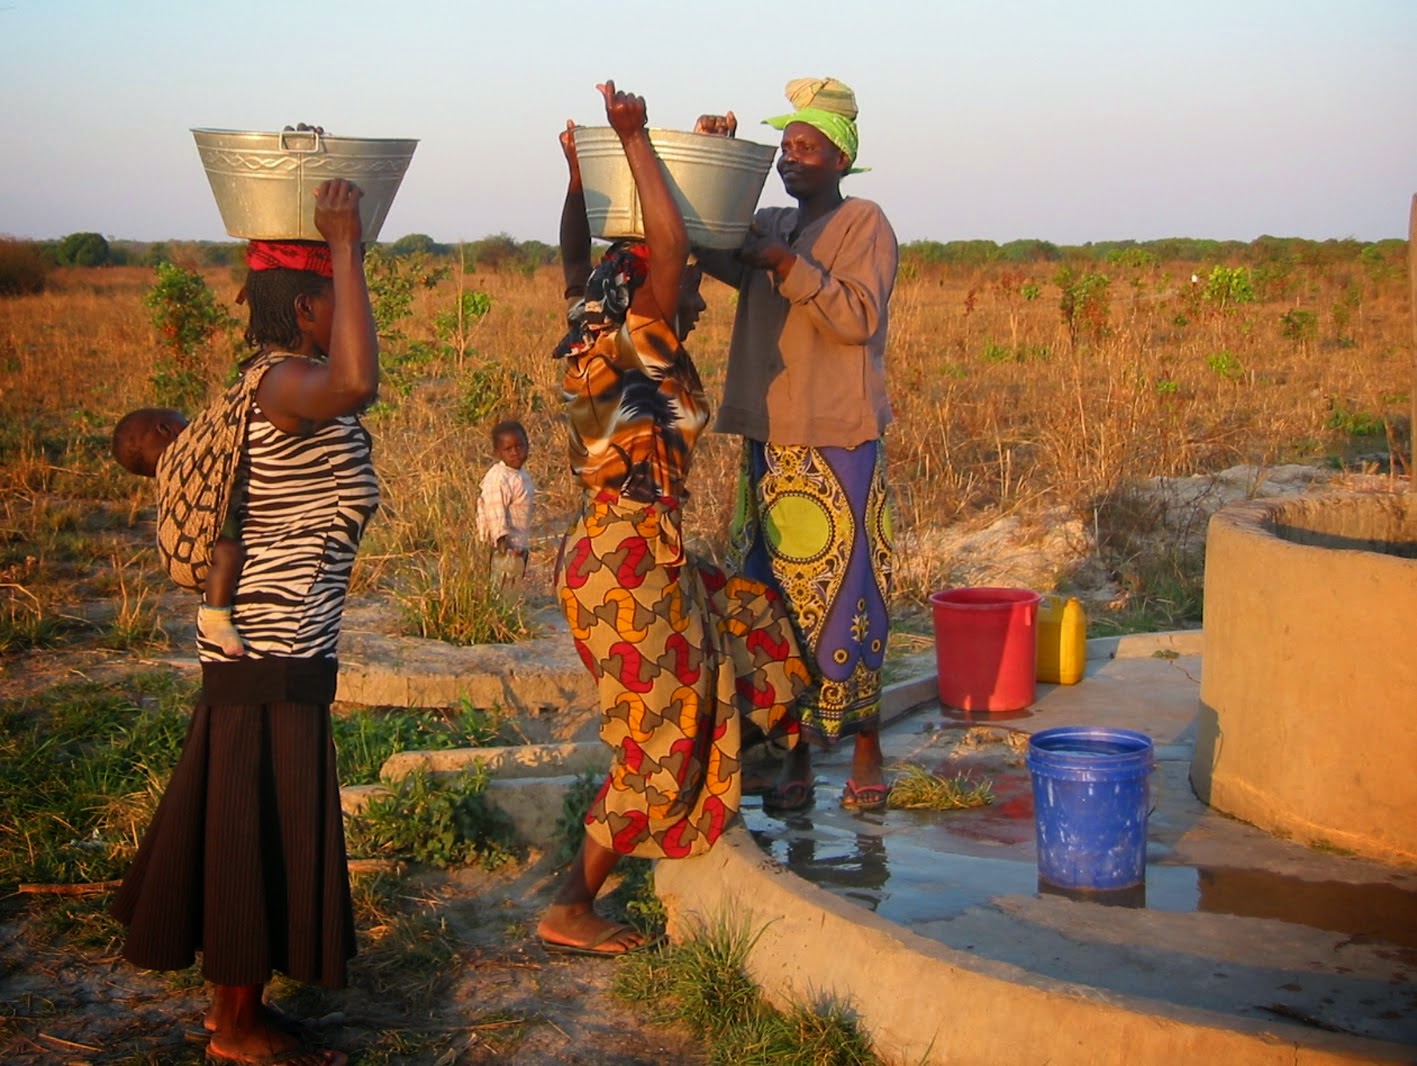 Fetching water from the well